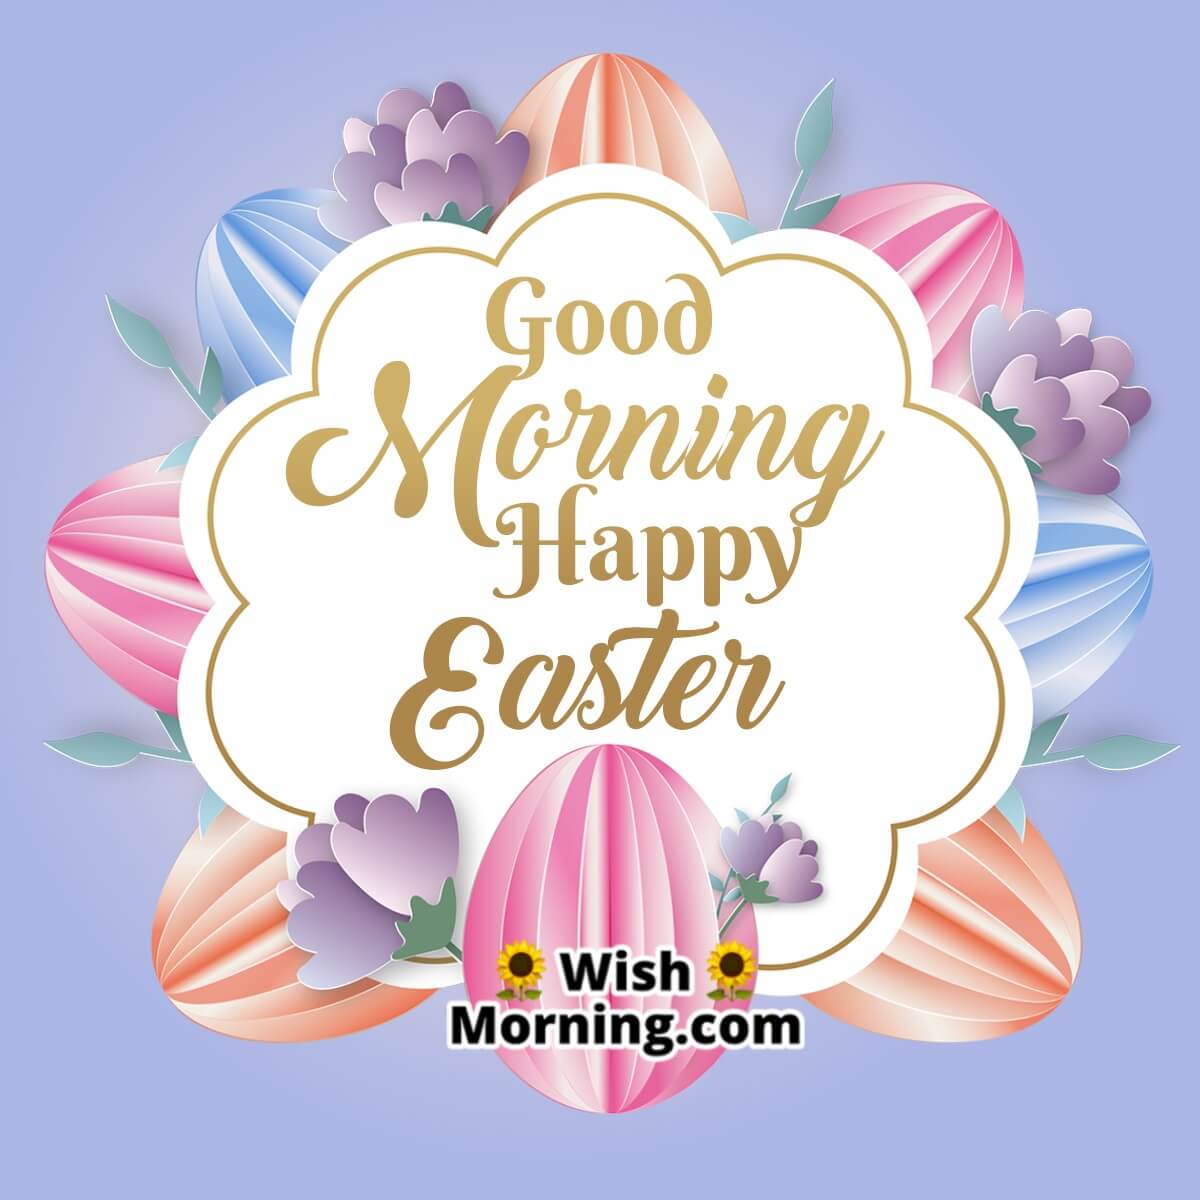 Good Morning Happy Easter Greetings